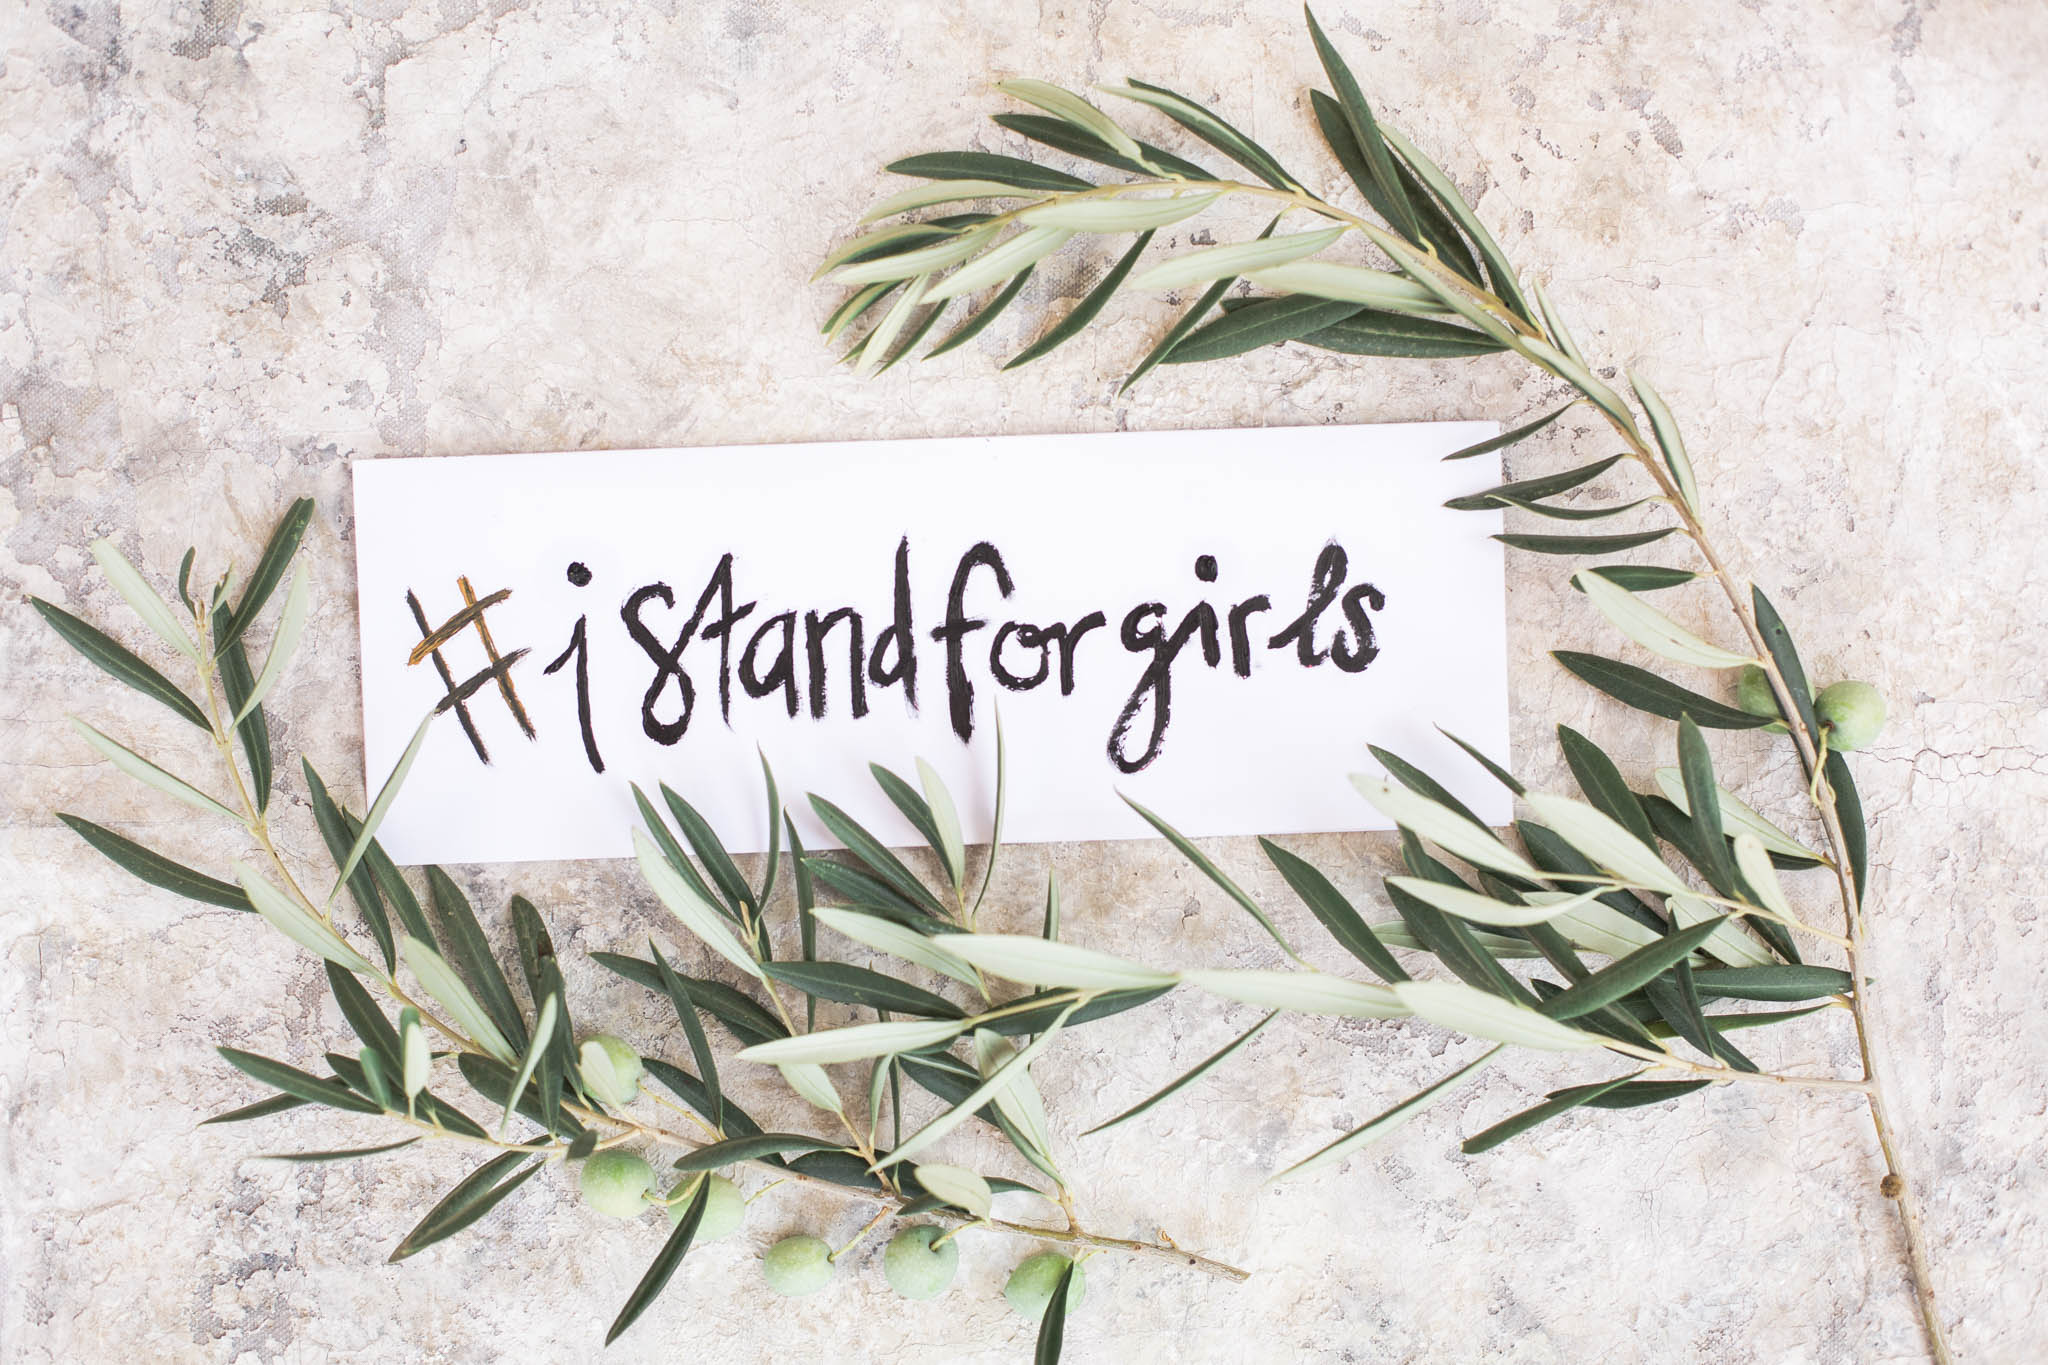 I stand for girls sign with olive leaves